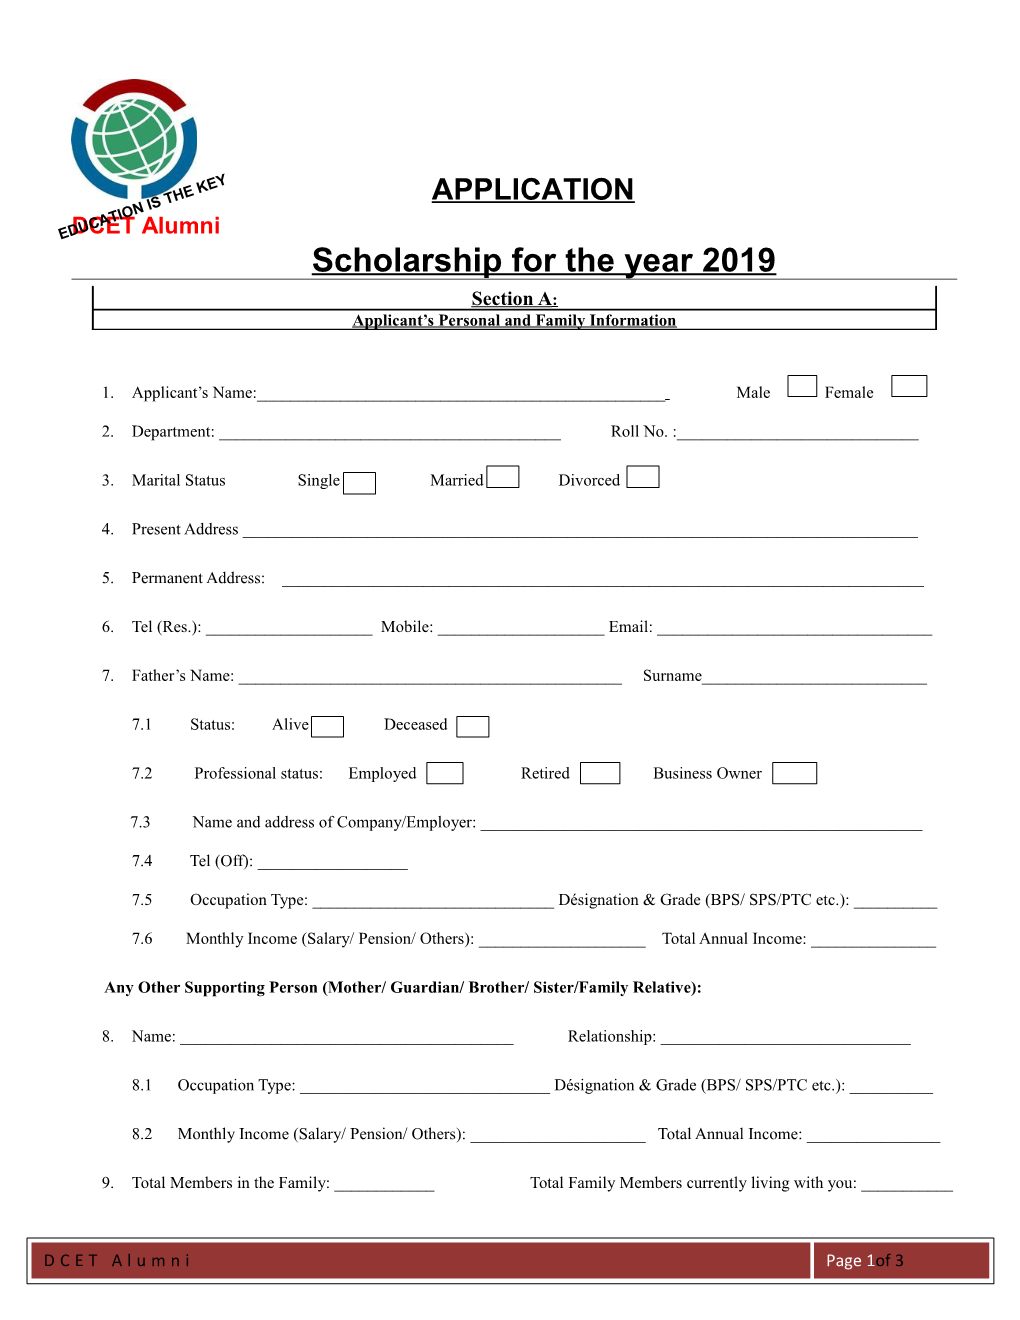 Scholarship for the Year 2019